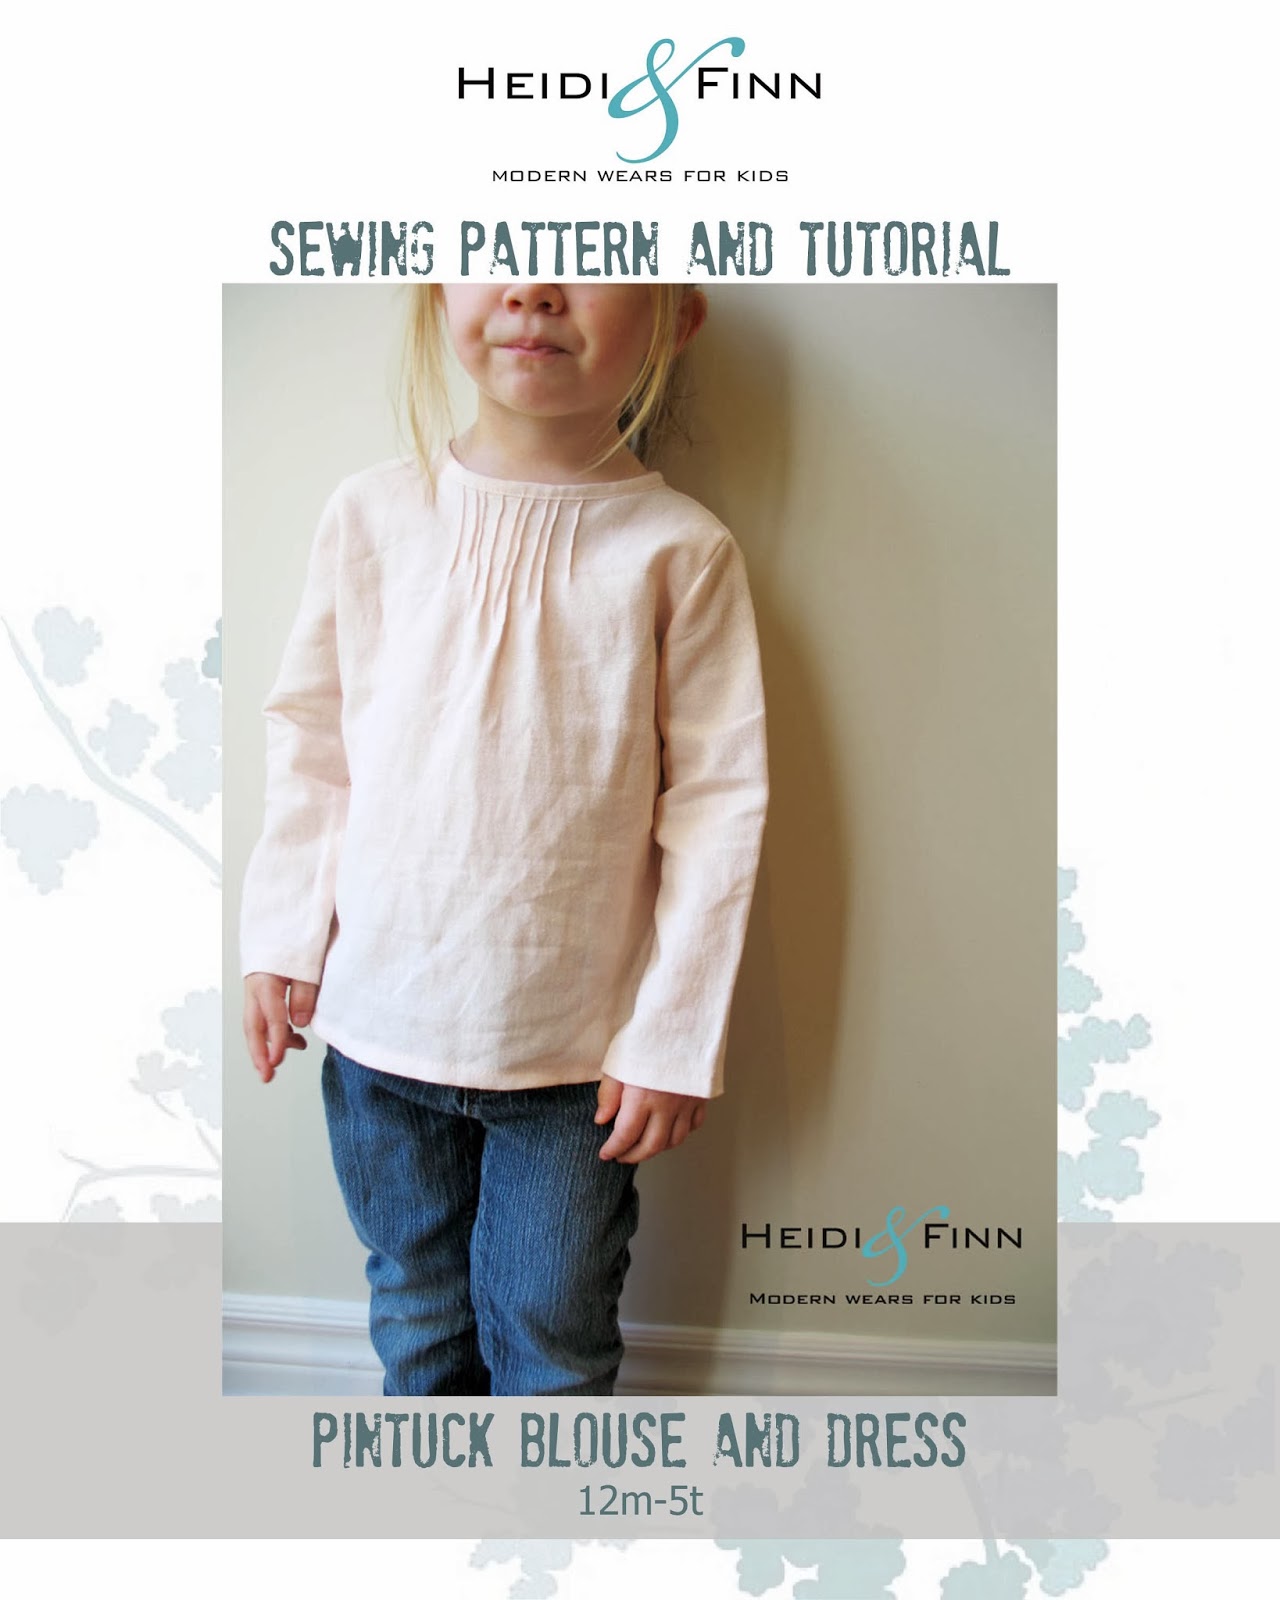 https://www.etsy.com/listing/181306376/pintuck-blouse-and-dress-pdf-pattern-and?ref=listing-shop-header-2